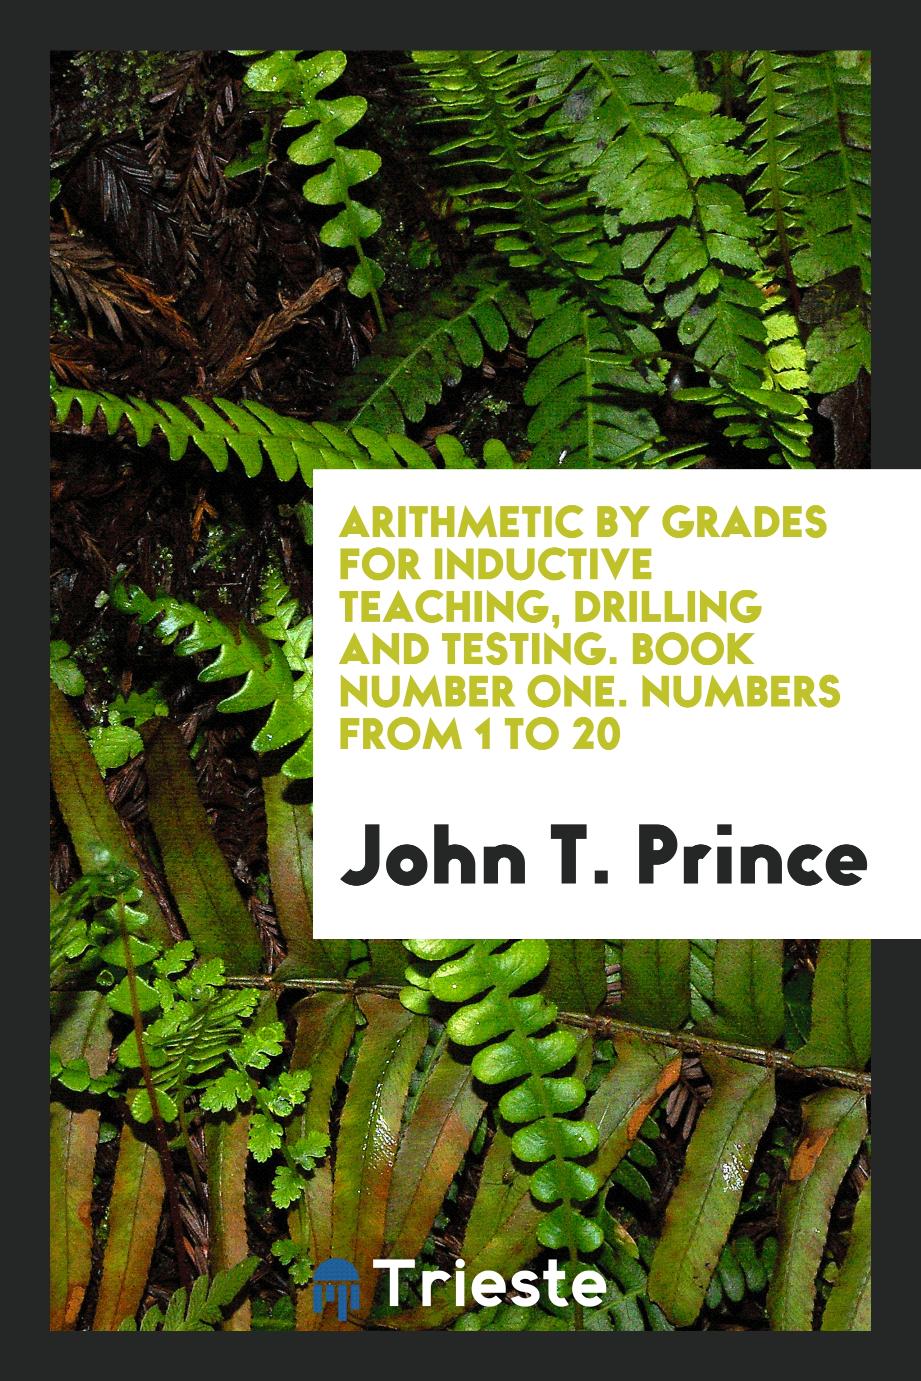 Arithmetic by Grades for Inductive Teaching, Drilling and Testing. Book Number One. Numbers from 1 to 20